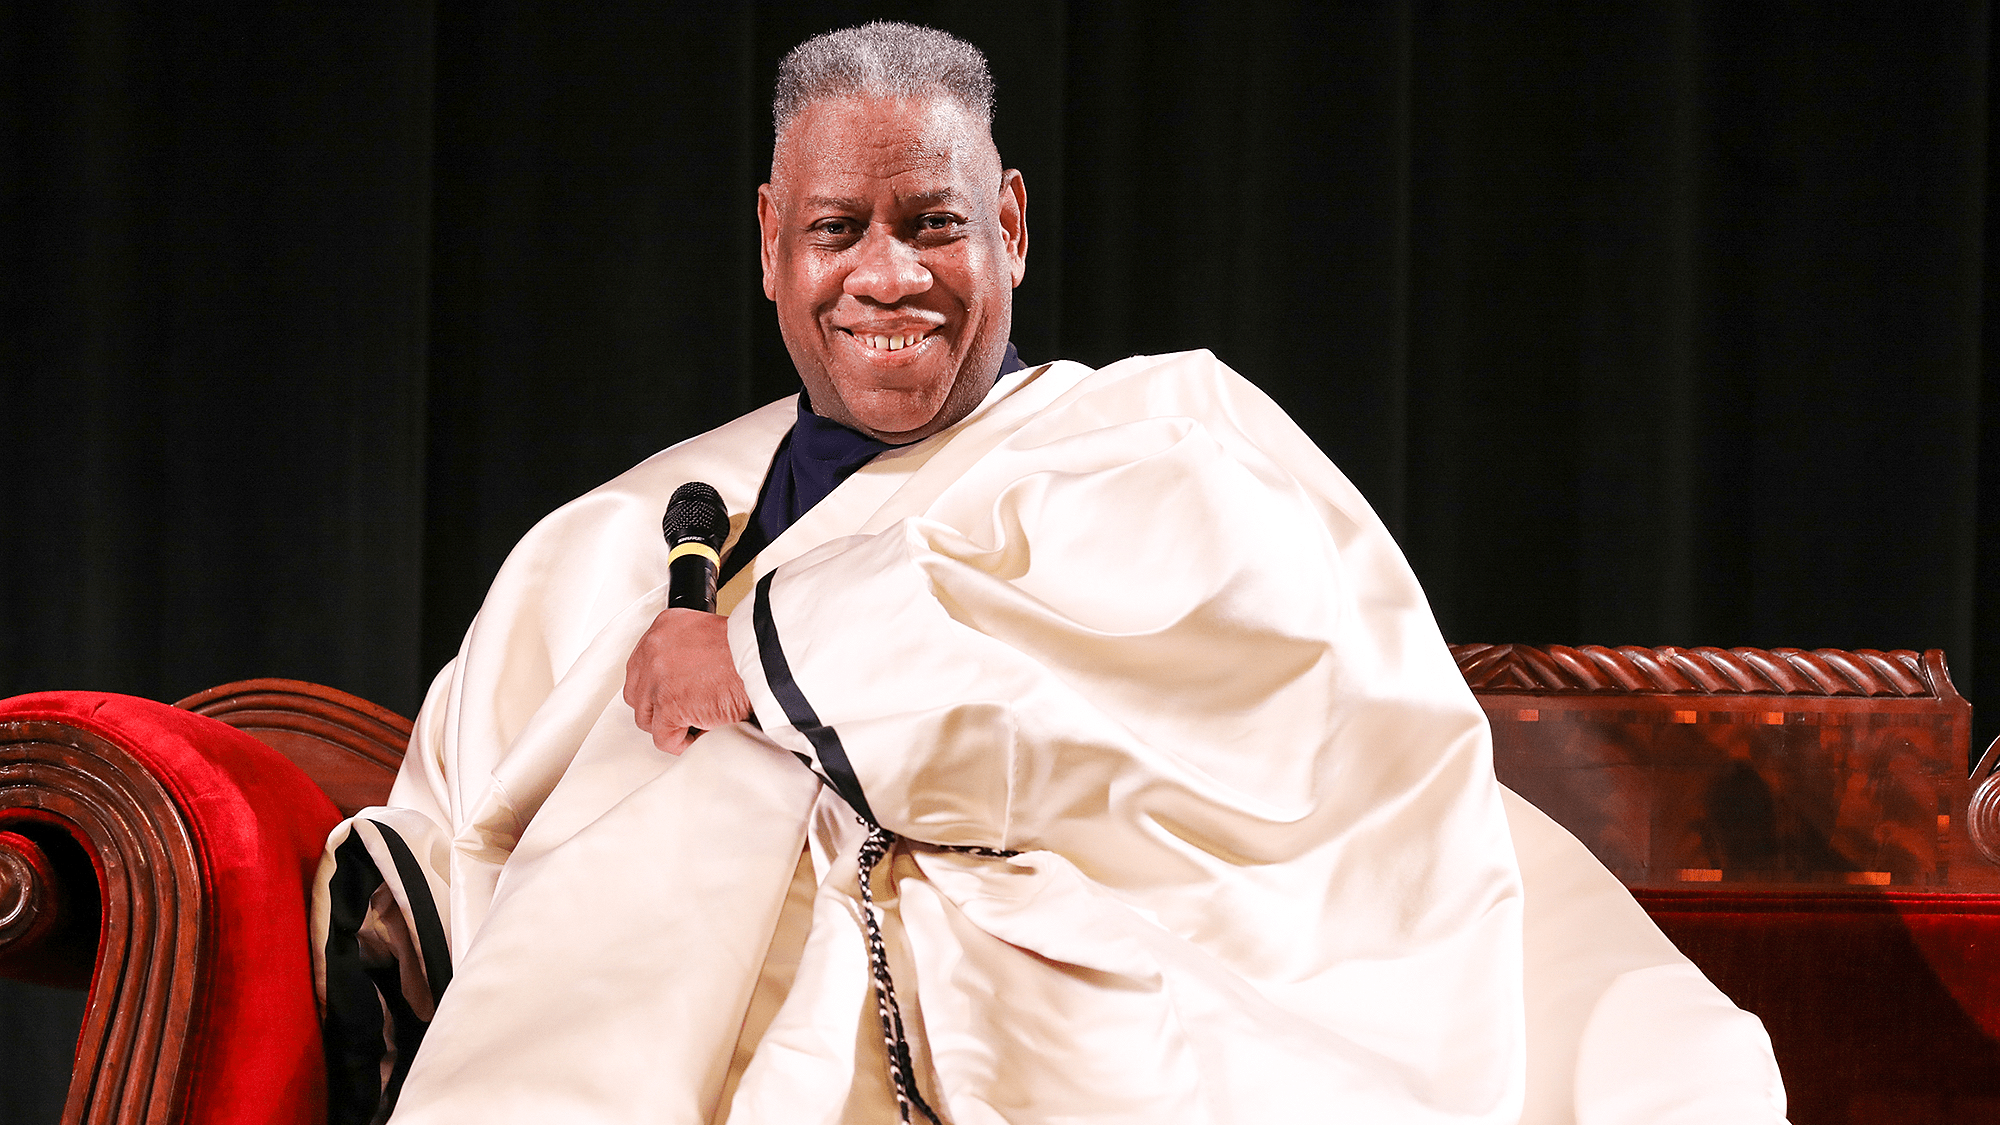 André Leon Talley, Fashion Journalist and Icon, is dead at 73.